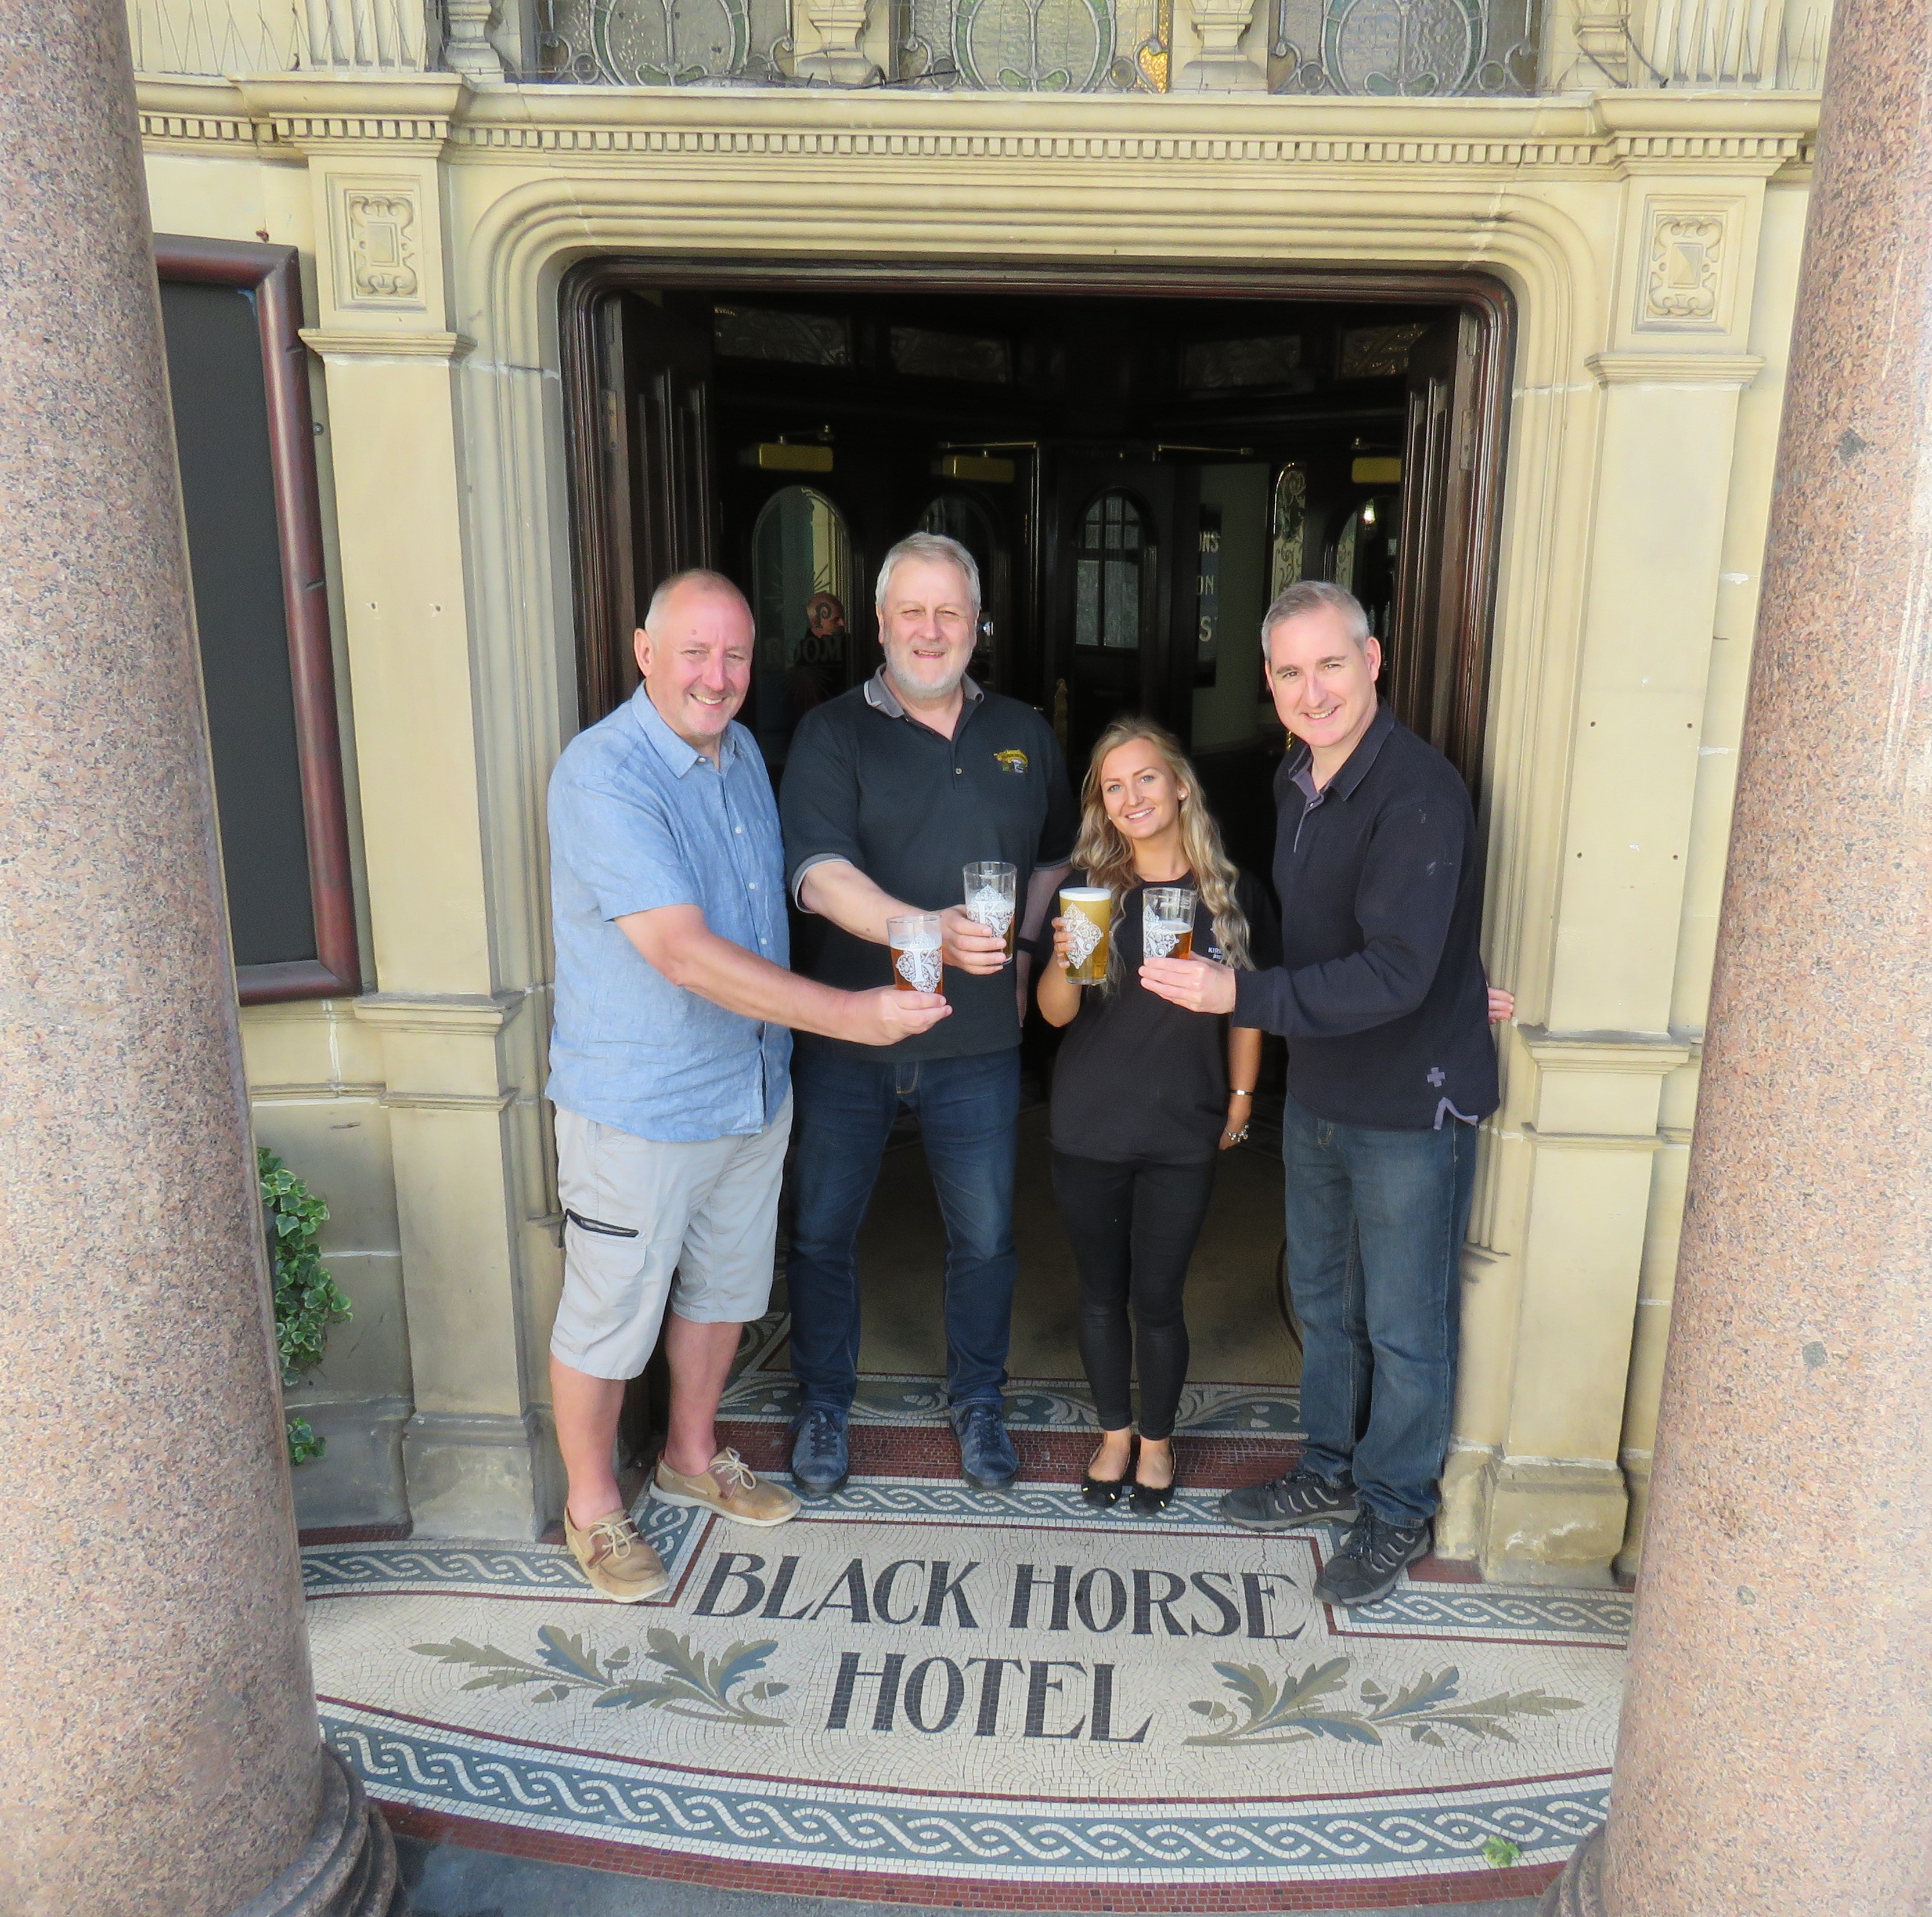 Otley Pub Club toast the successful re-opening of the Black Horse Hotel by award-winning Kirkstall Brewery and Brudenell Social Club